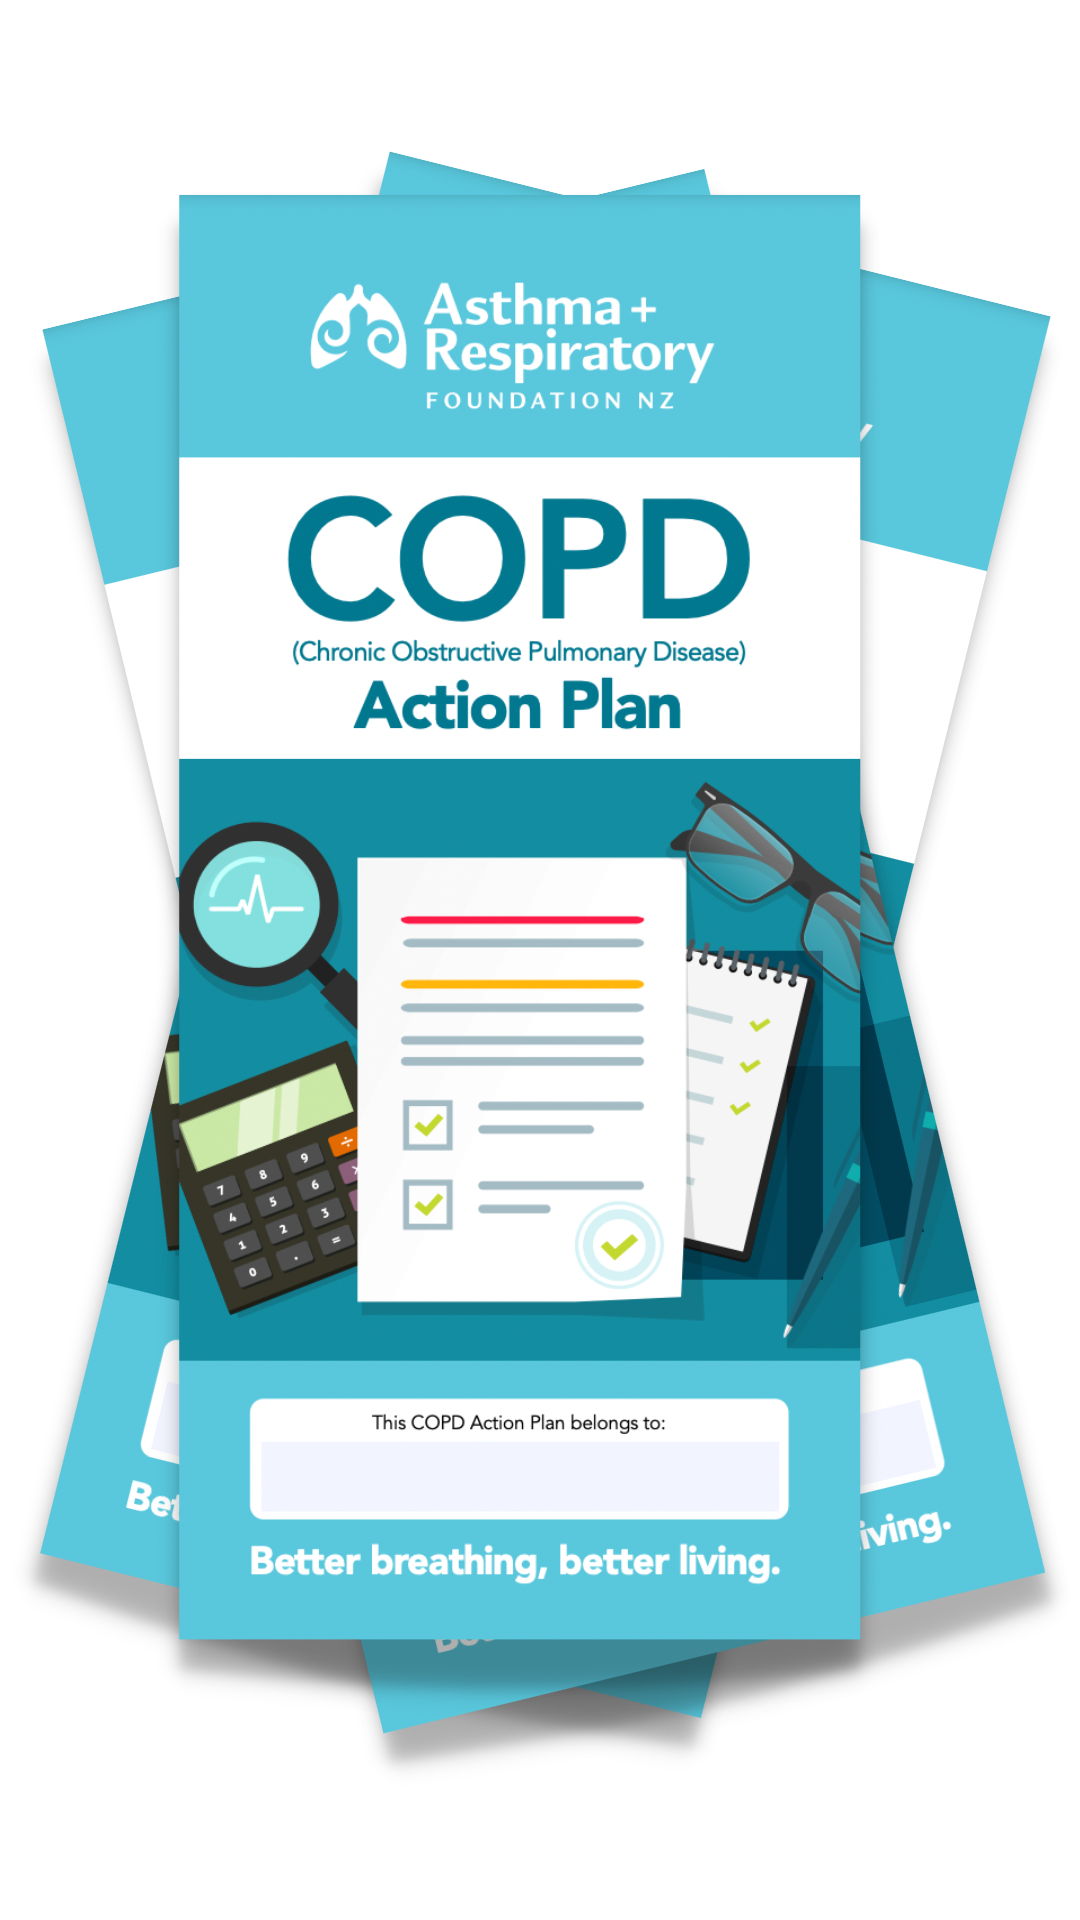 COPD Action Plan